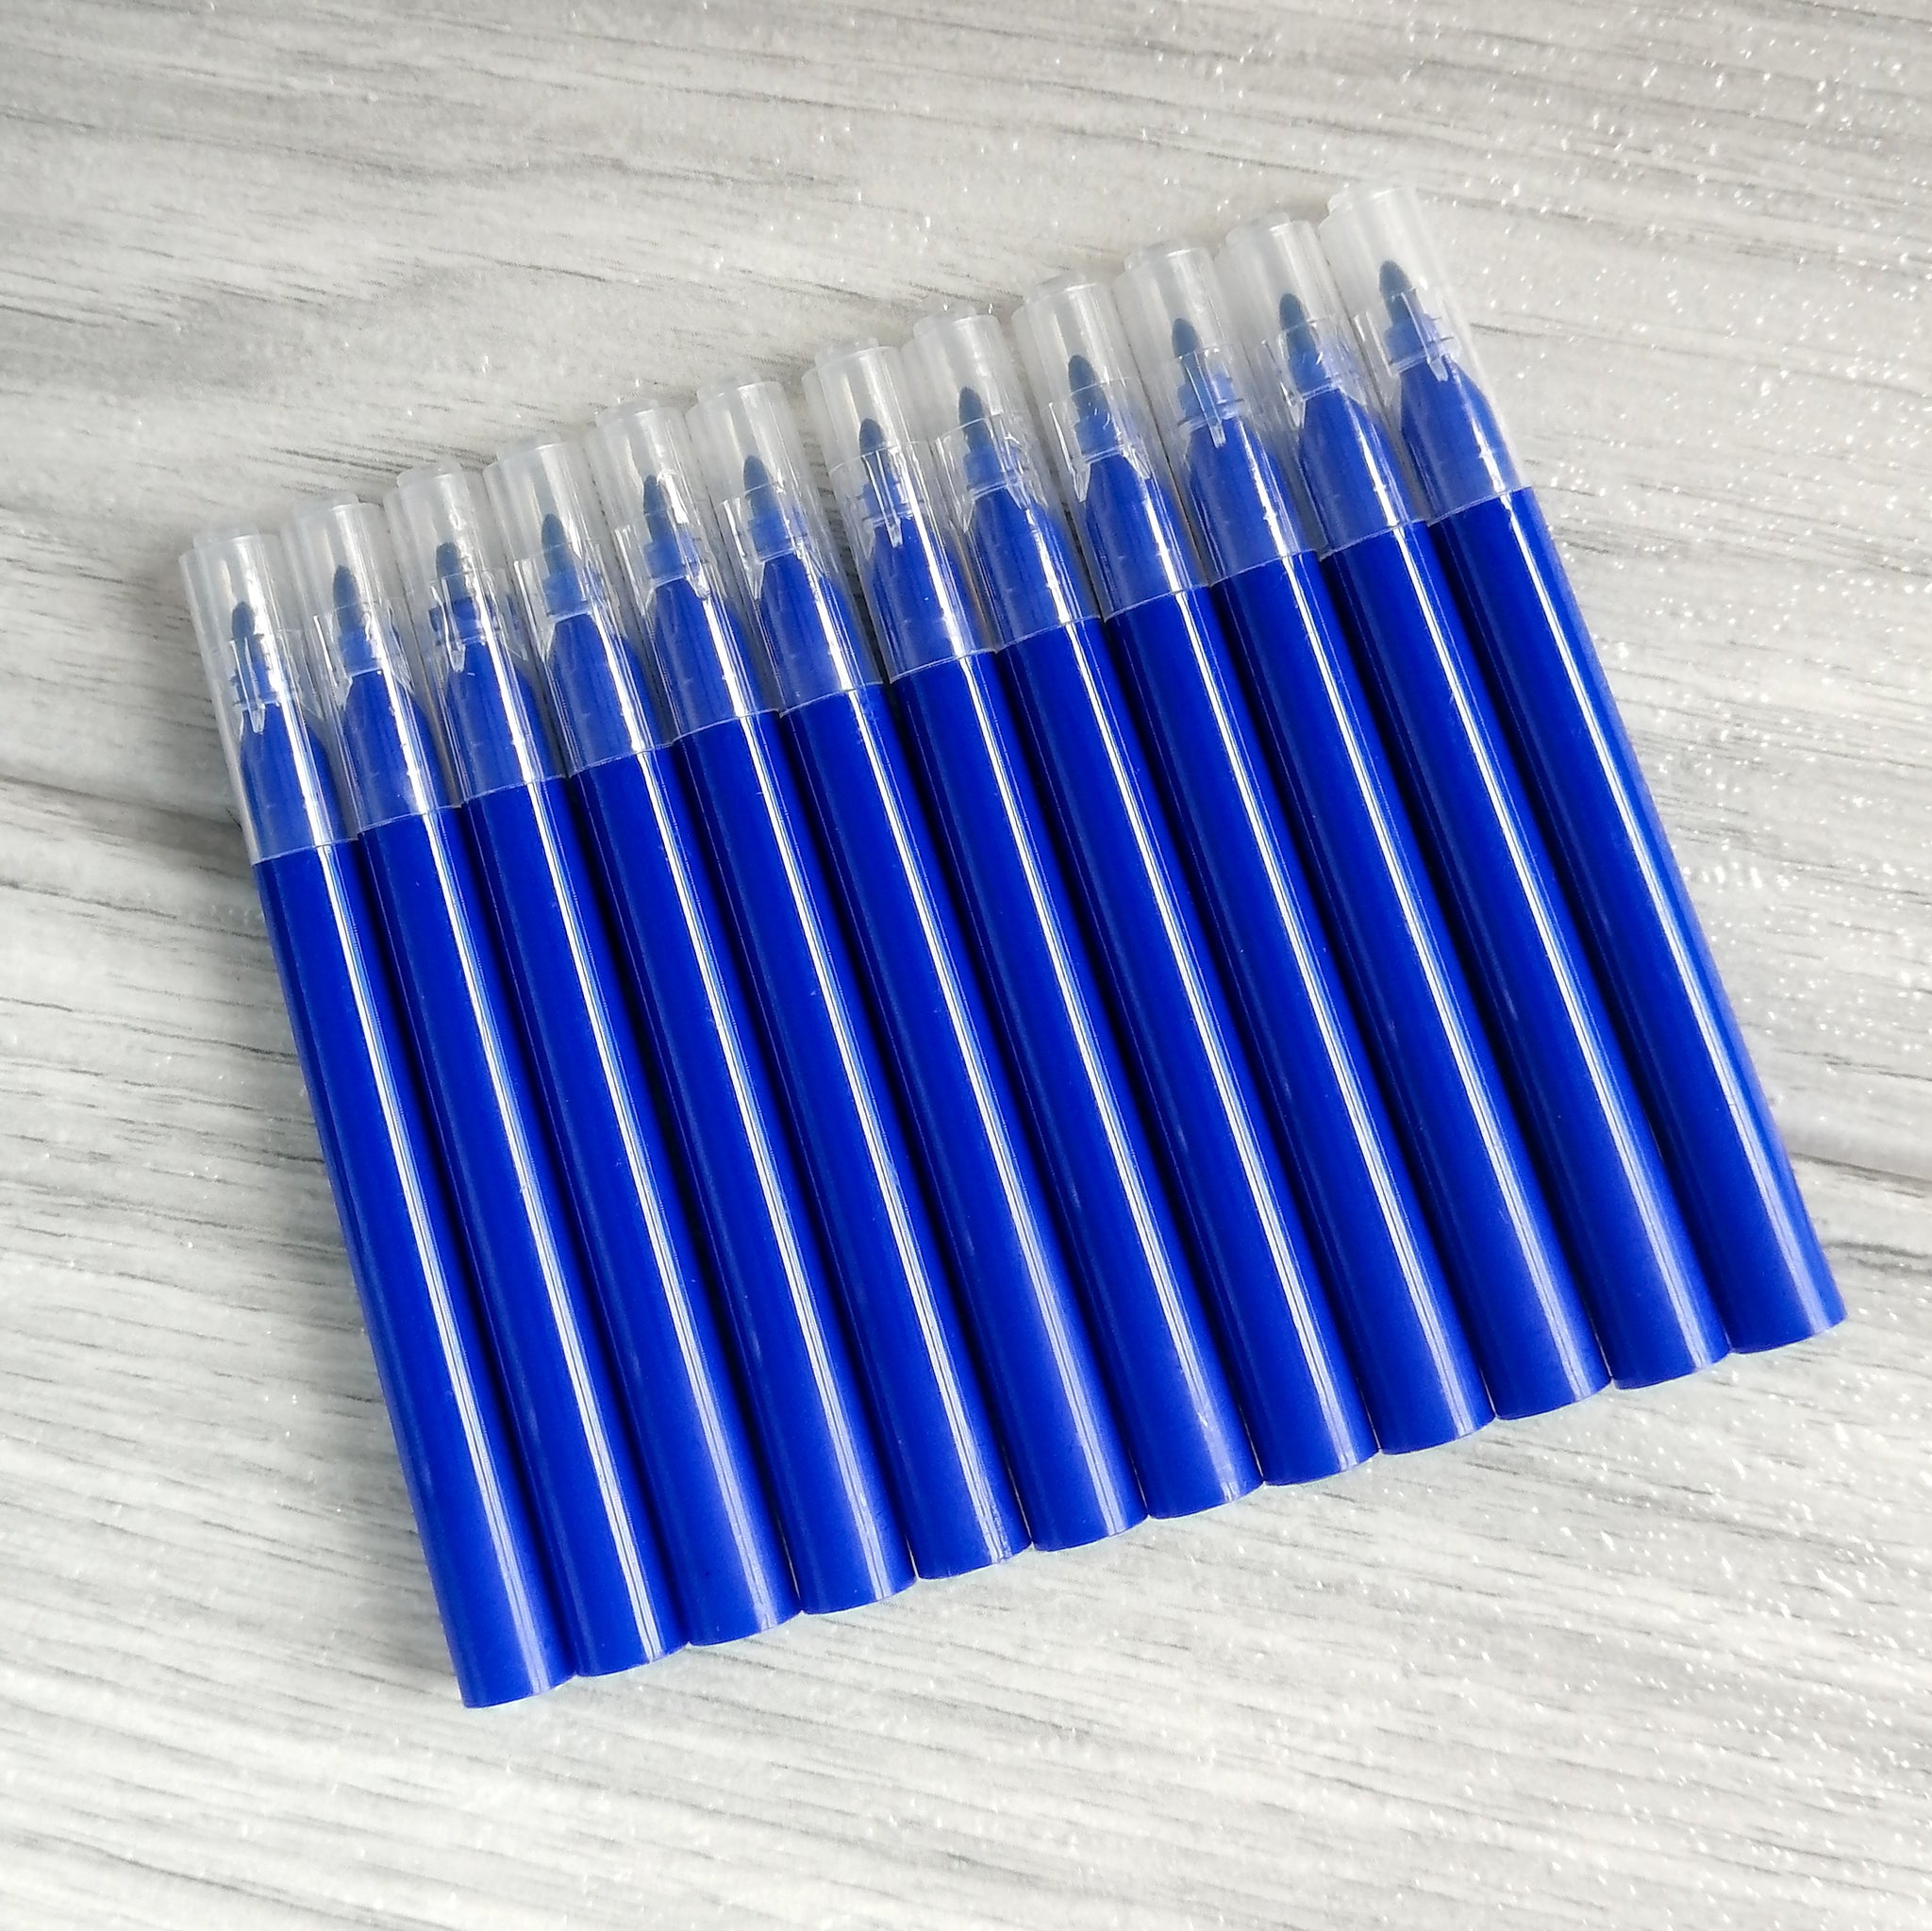 Mini Edible Markers - BLUE PACK OF 12